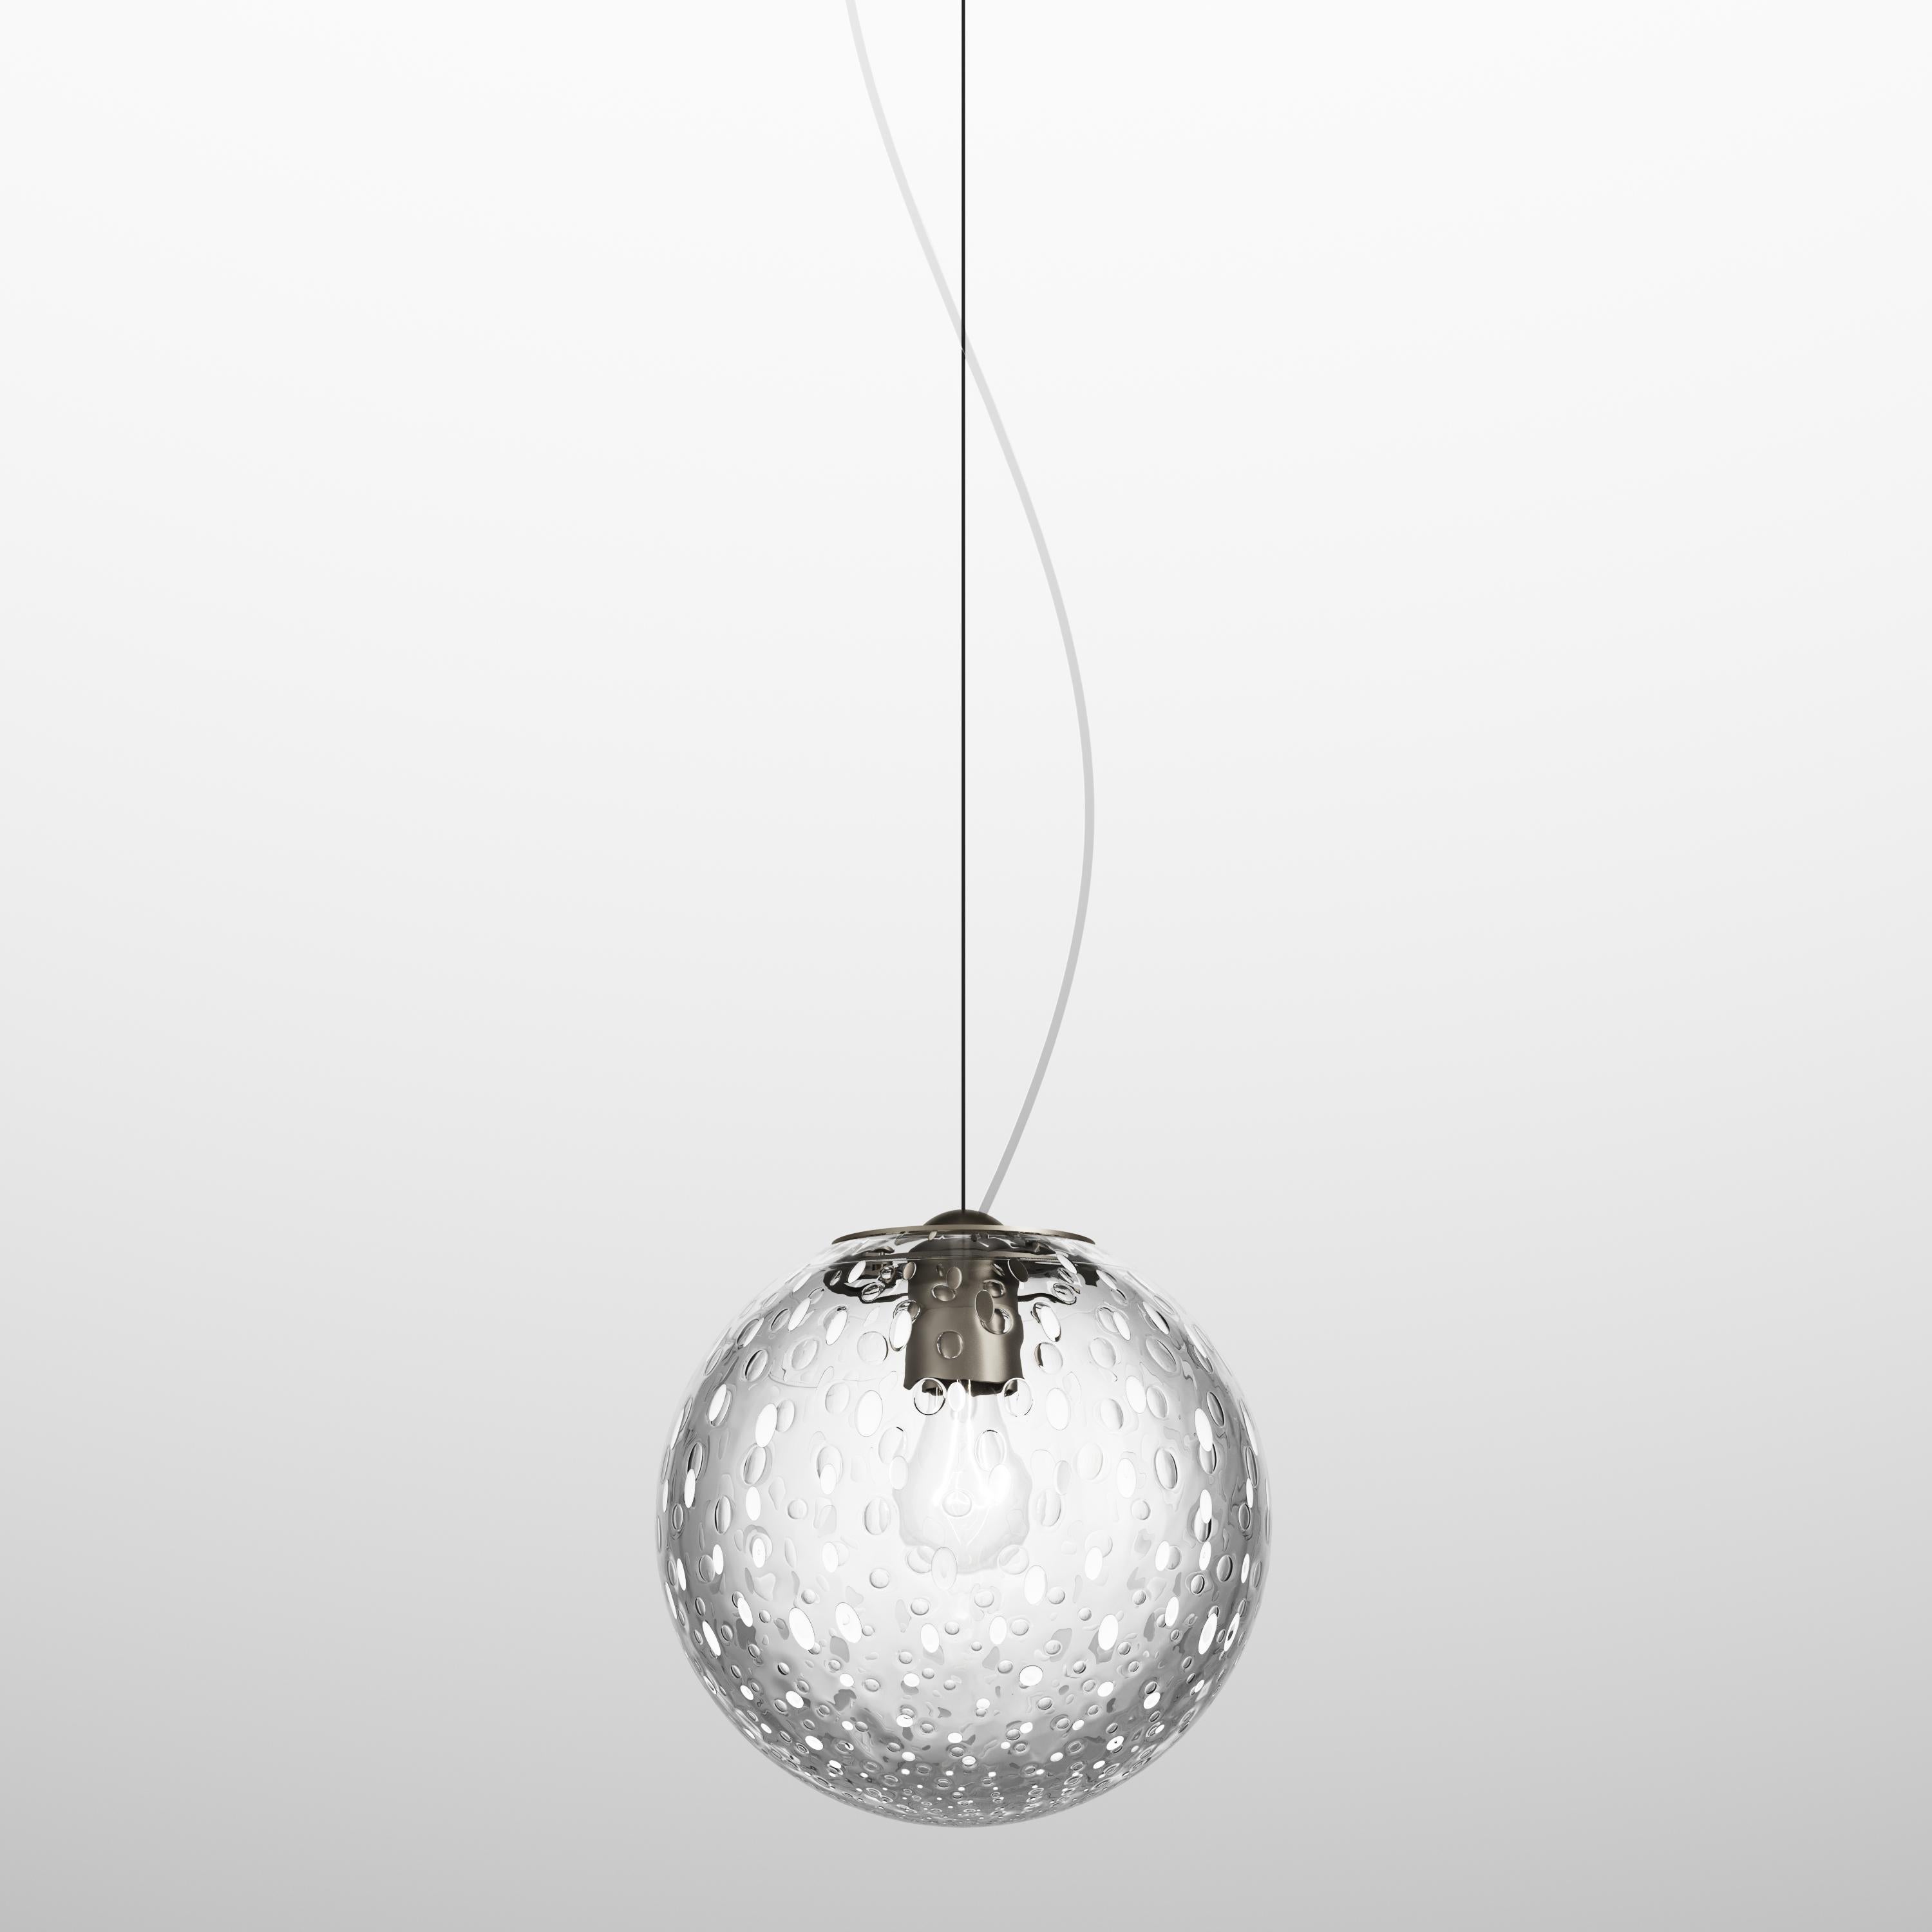 The main characteristic of this collection of lamps produced with the “balloton” technique is the insertion of bubbles of air in the glass during its production. That creates multiple reflections and adds an organic texture on the surface of the